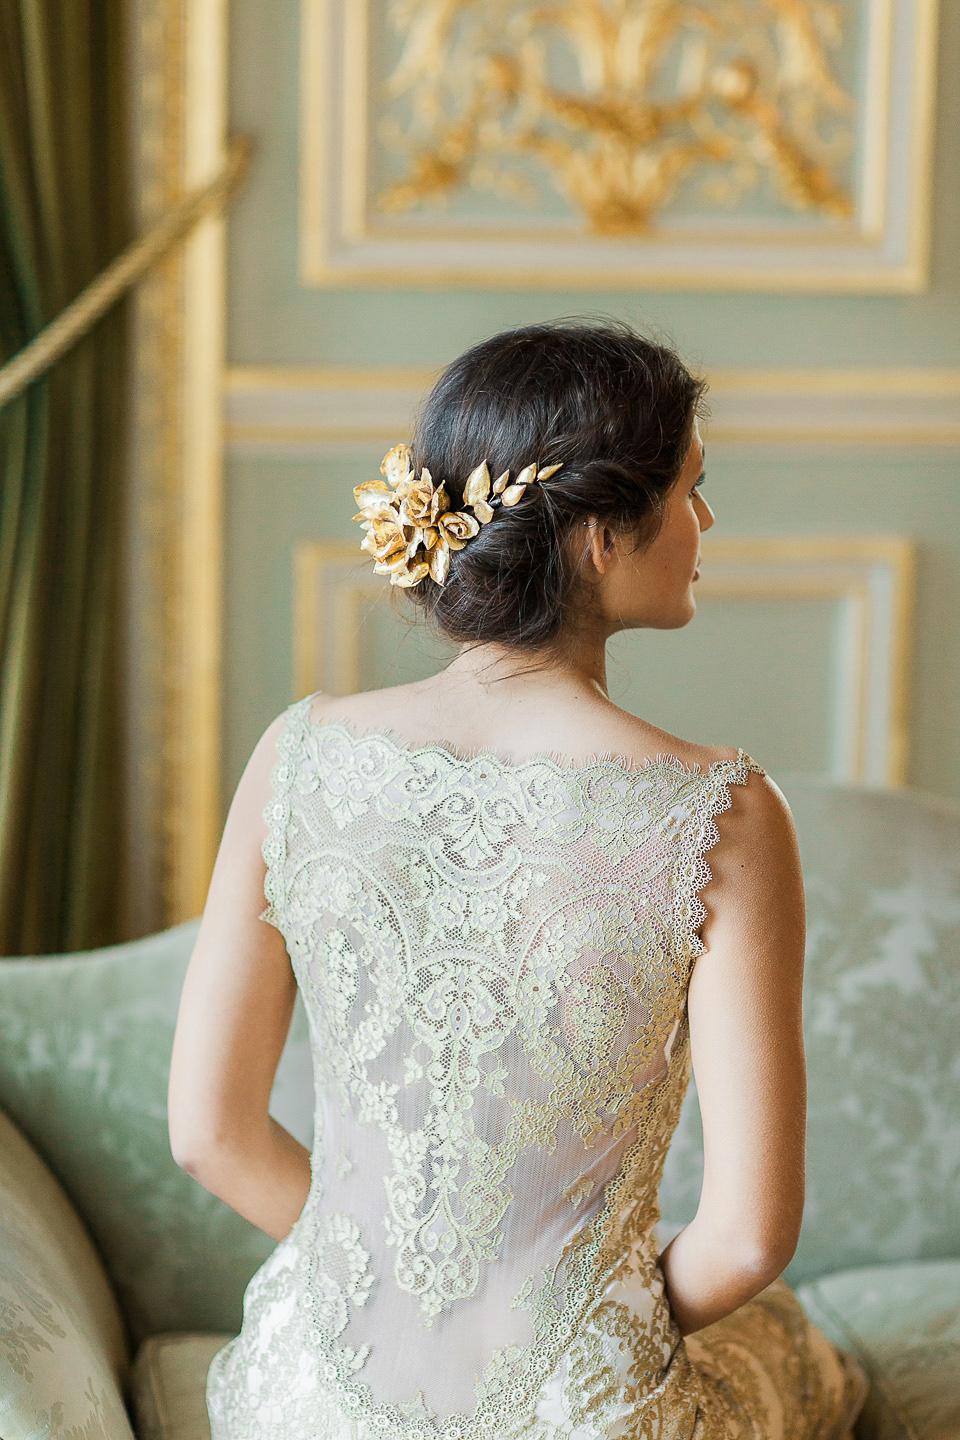 Lila accessories - shot on location at Fetcham Park by Katy Lunsford.